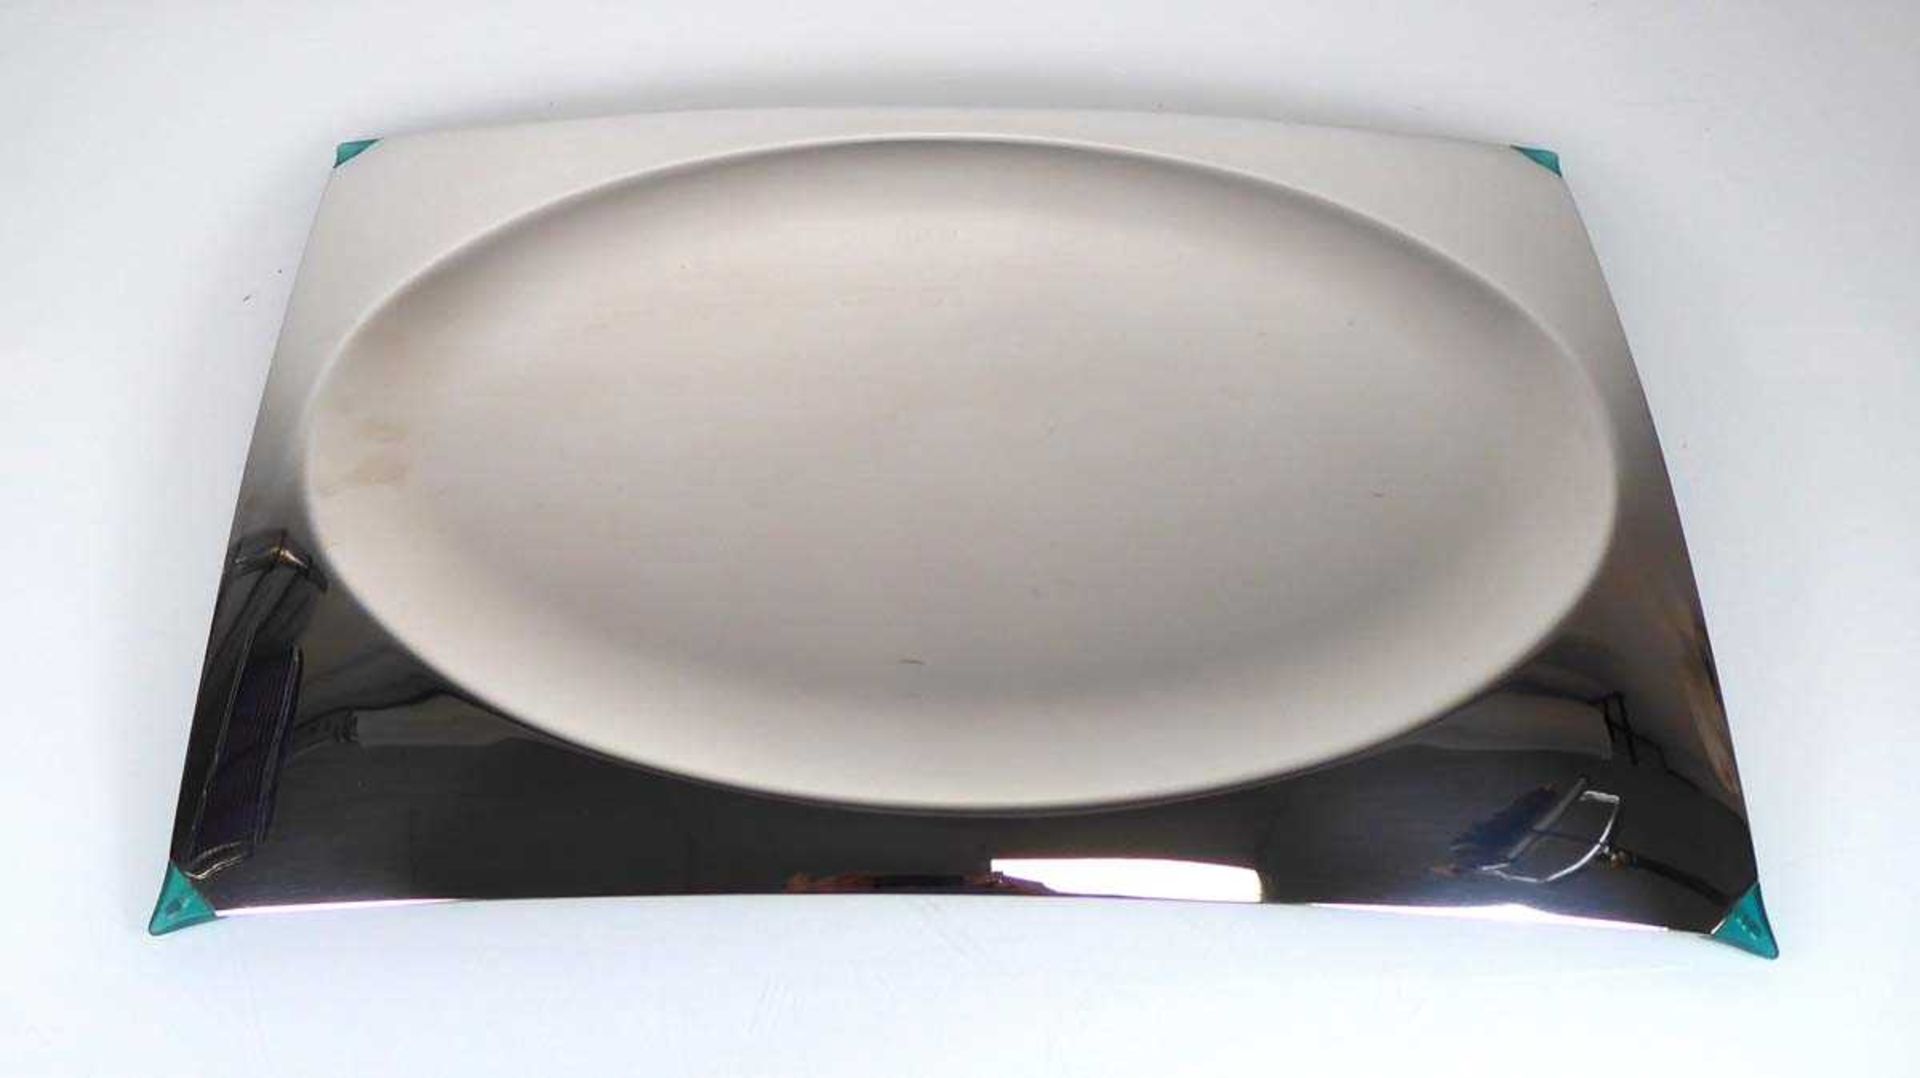 Philippe Starck for Alessi, a 'Voila Voila' stainless steel tray, boxed